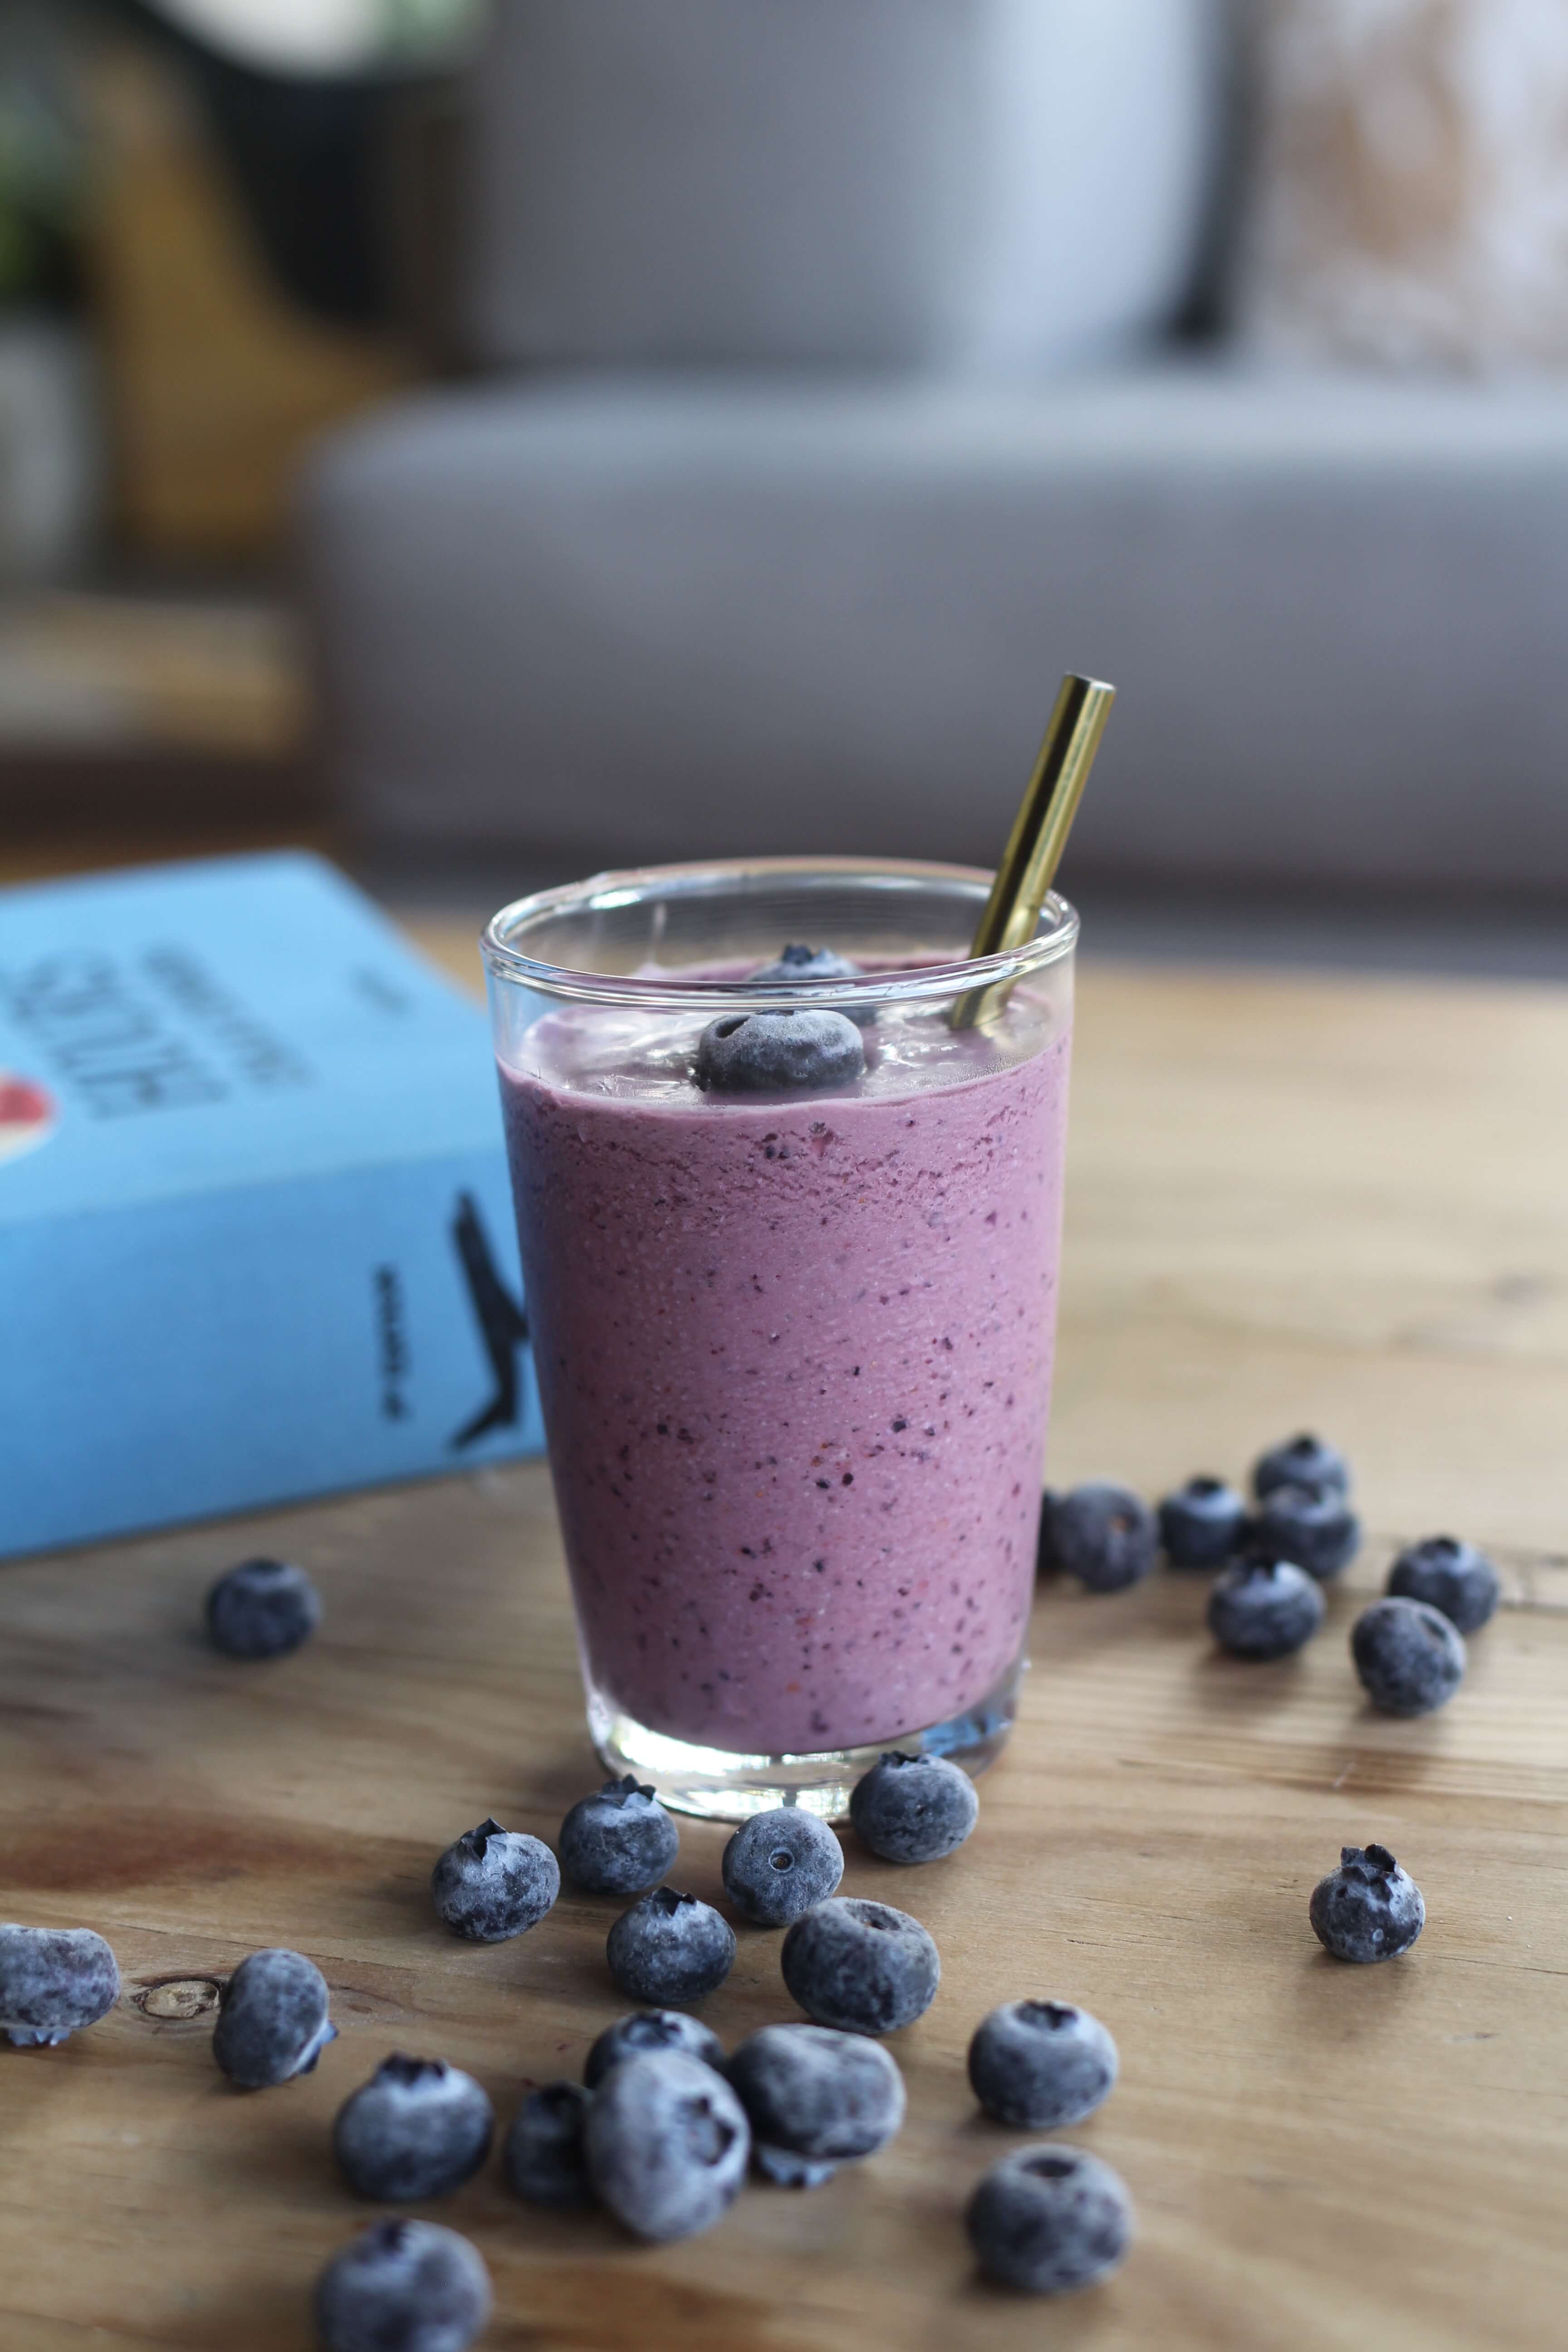 1627420048706 smoothie blueberries1 - smoothies ricos y nutritivos con superfoods